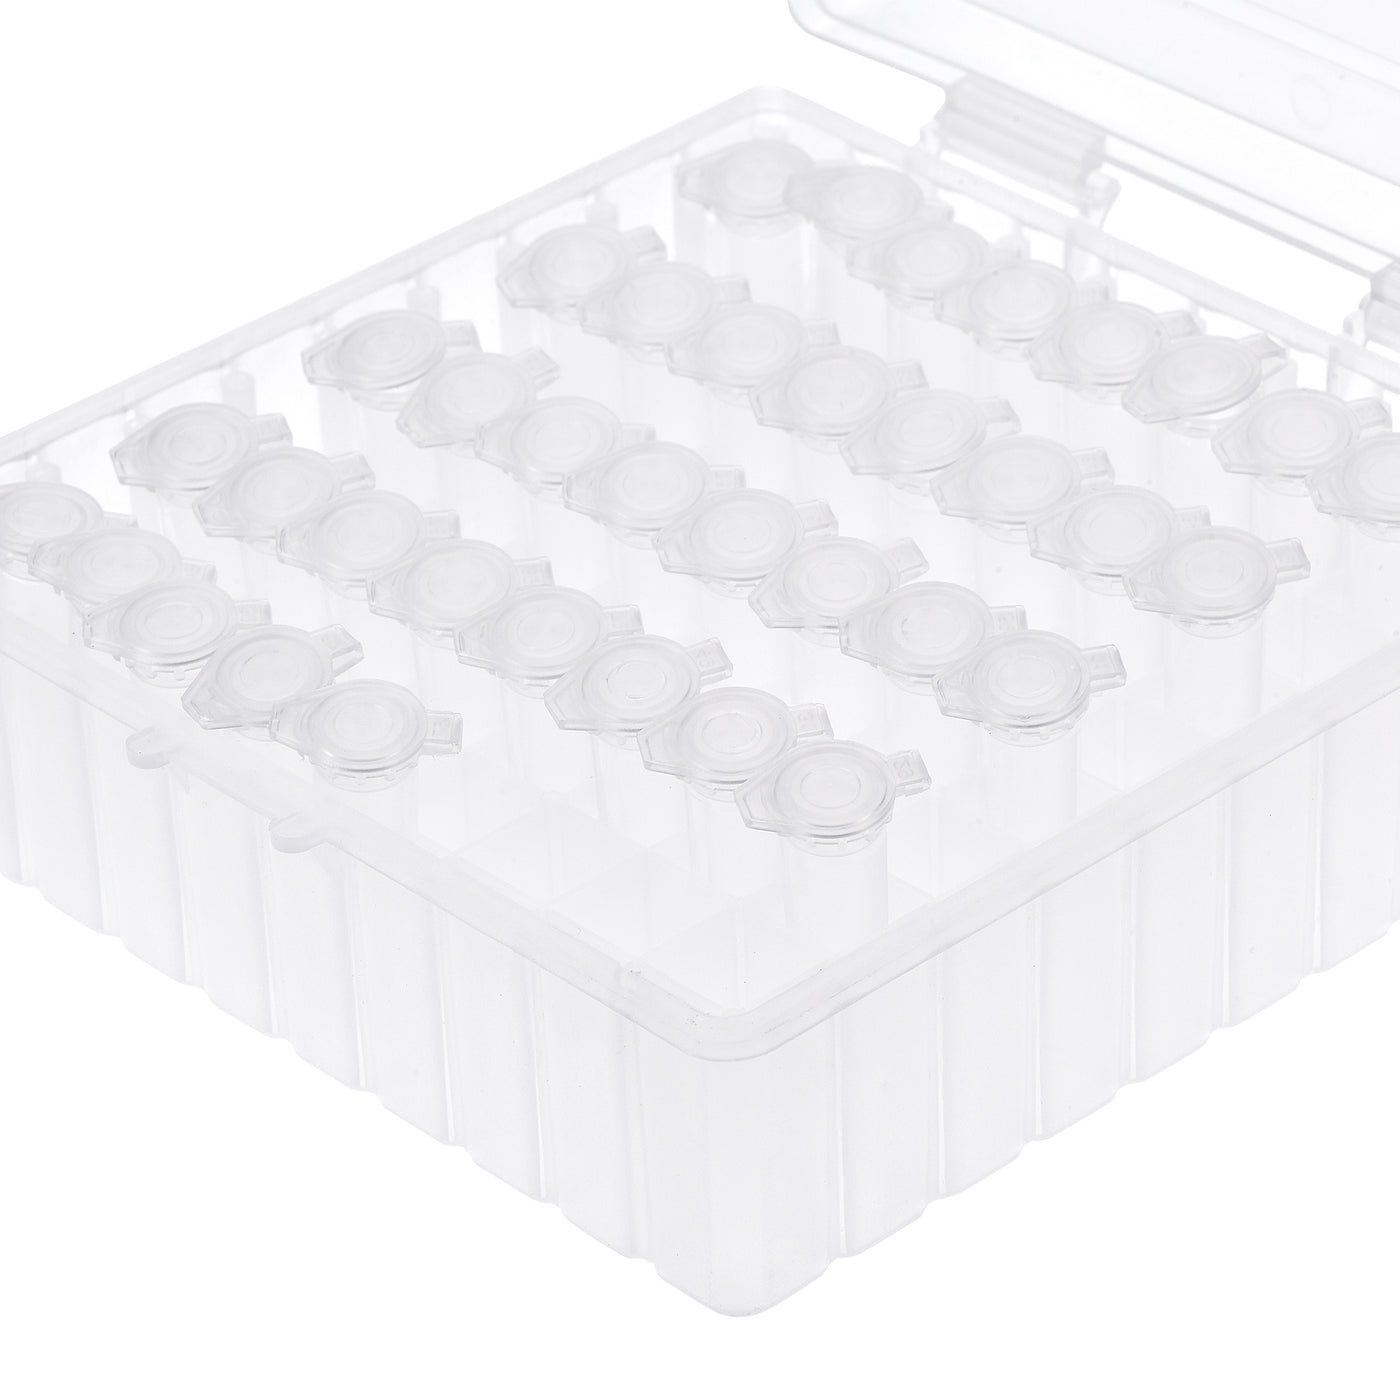 uxcell Uxcell Freezer Tube Box 100 Places Polypropylene Plastic Lockable Holder Rack for 1.5/1.8/2ml Microcentrifuge Tubes, White